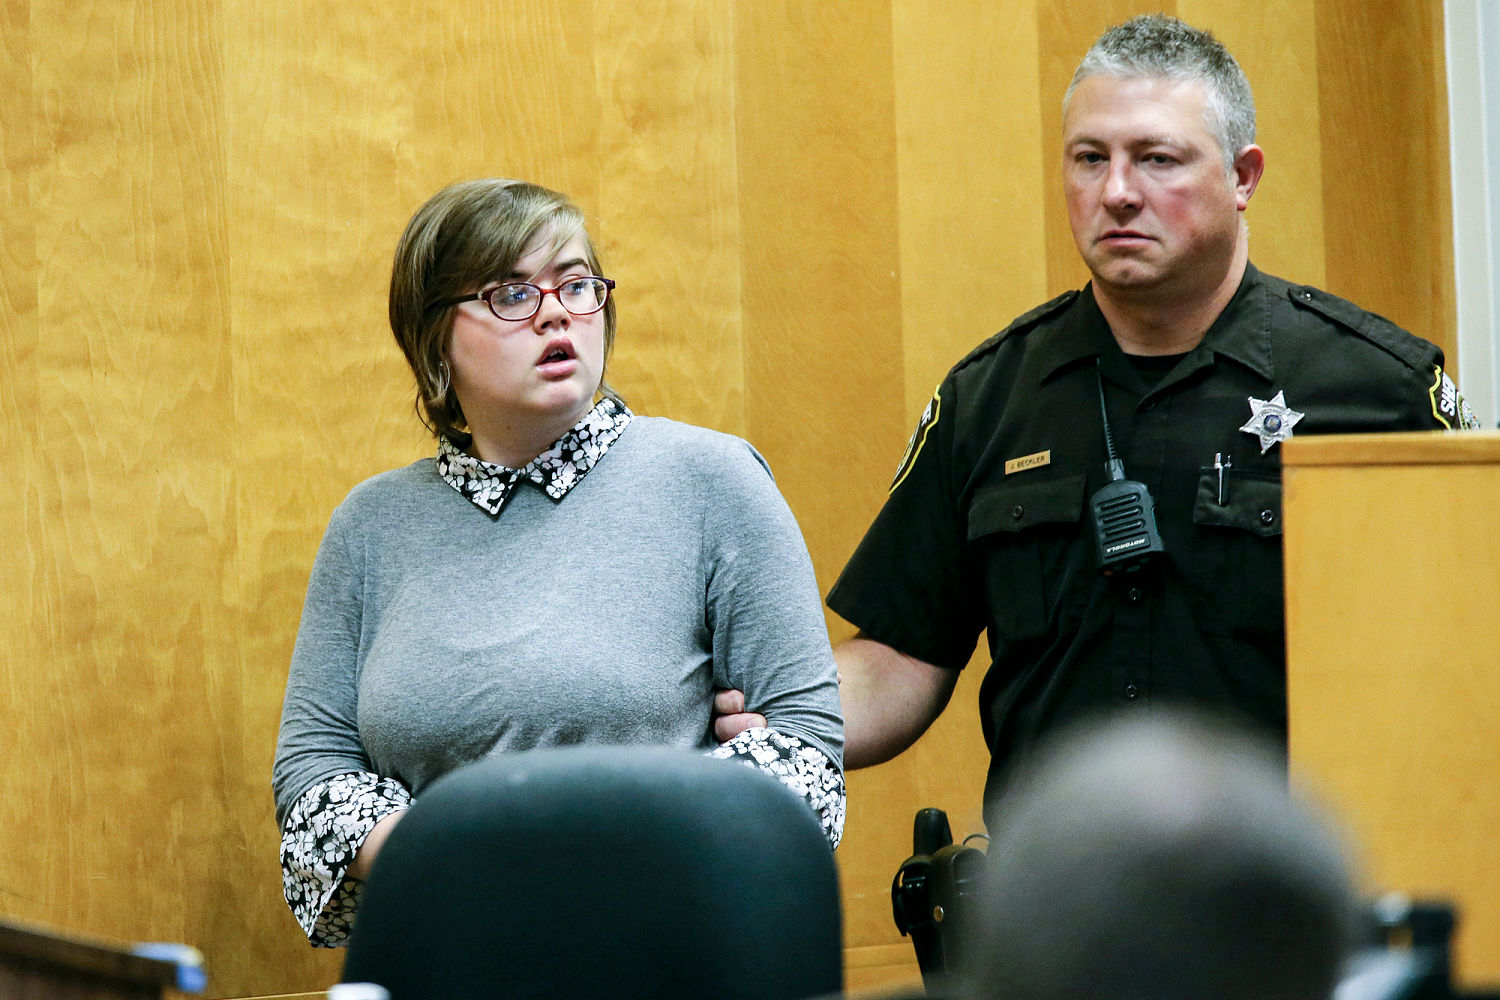 Judge denies release from psychiatric institute for woman involved in 'Slender Man' attack